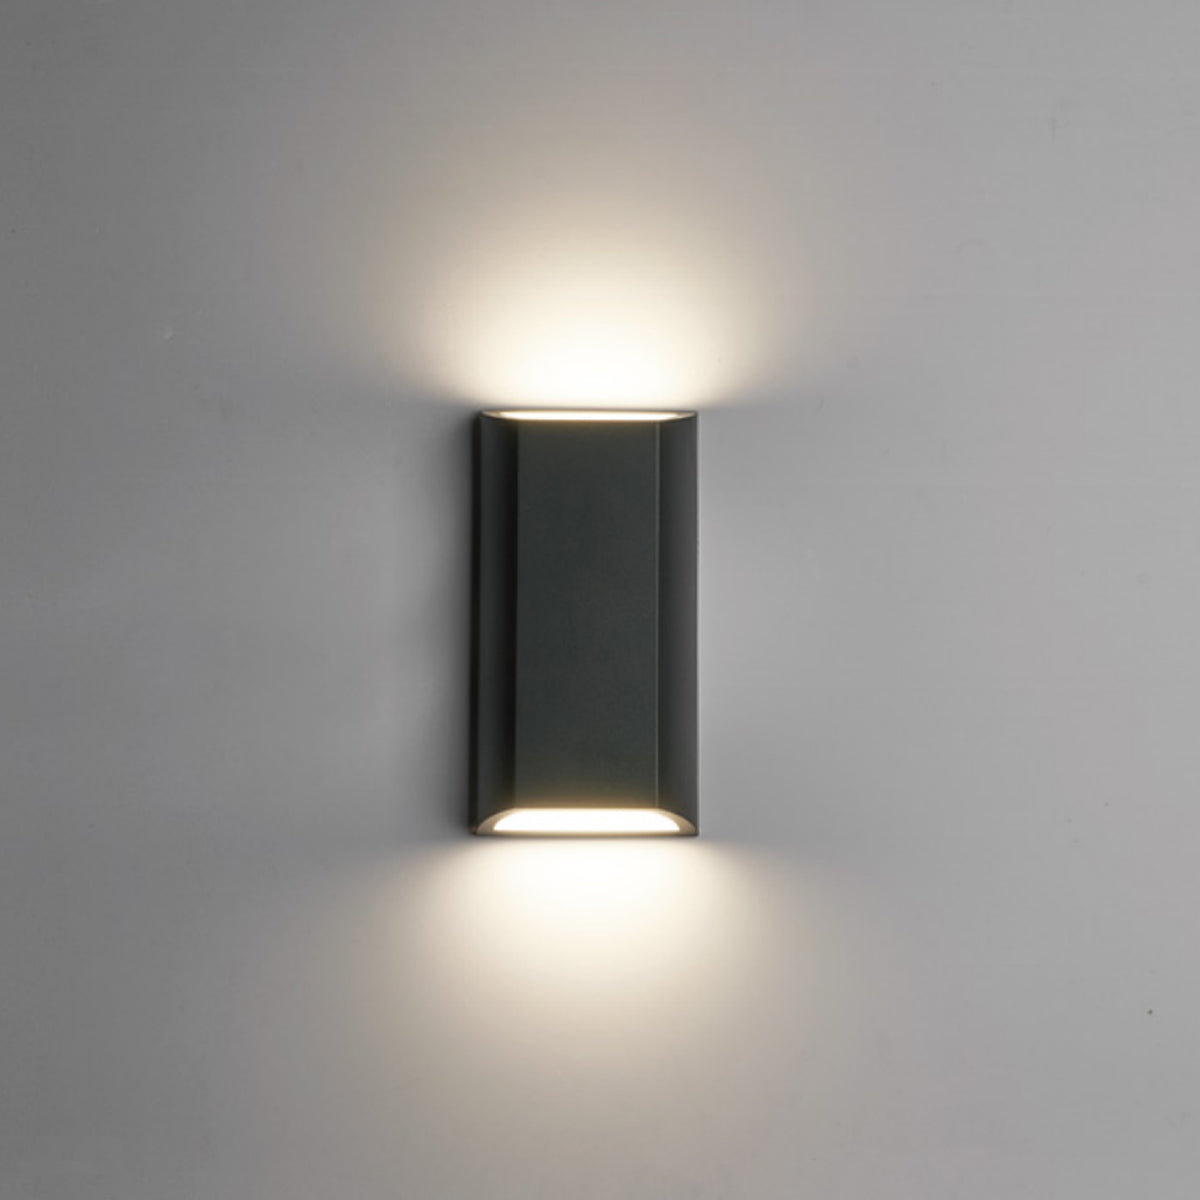 clear quality image of our WILMA dark grey rectangular wall light switched on showing white light on top and bottom applied to grey wall